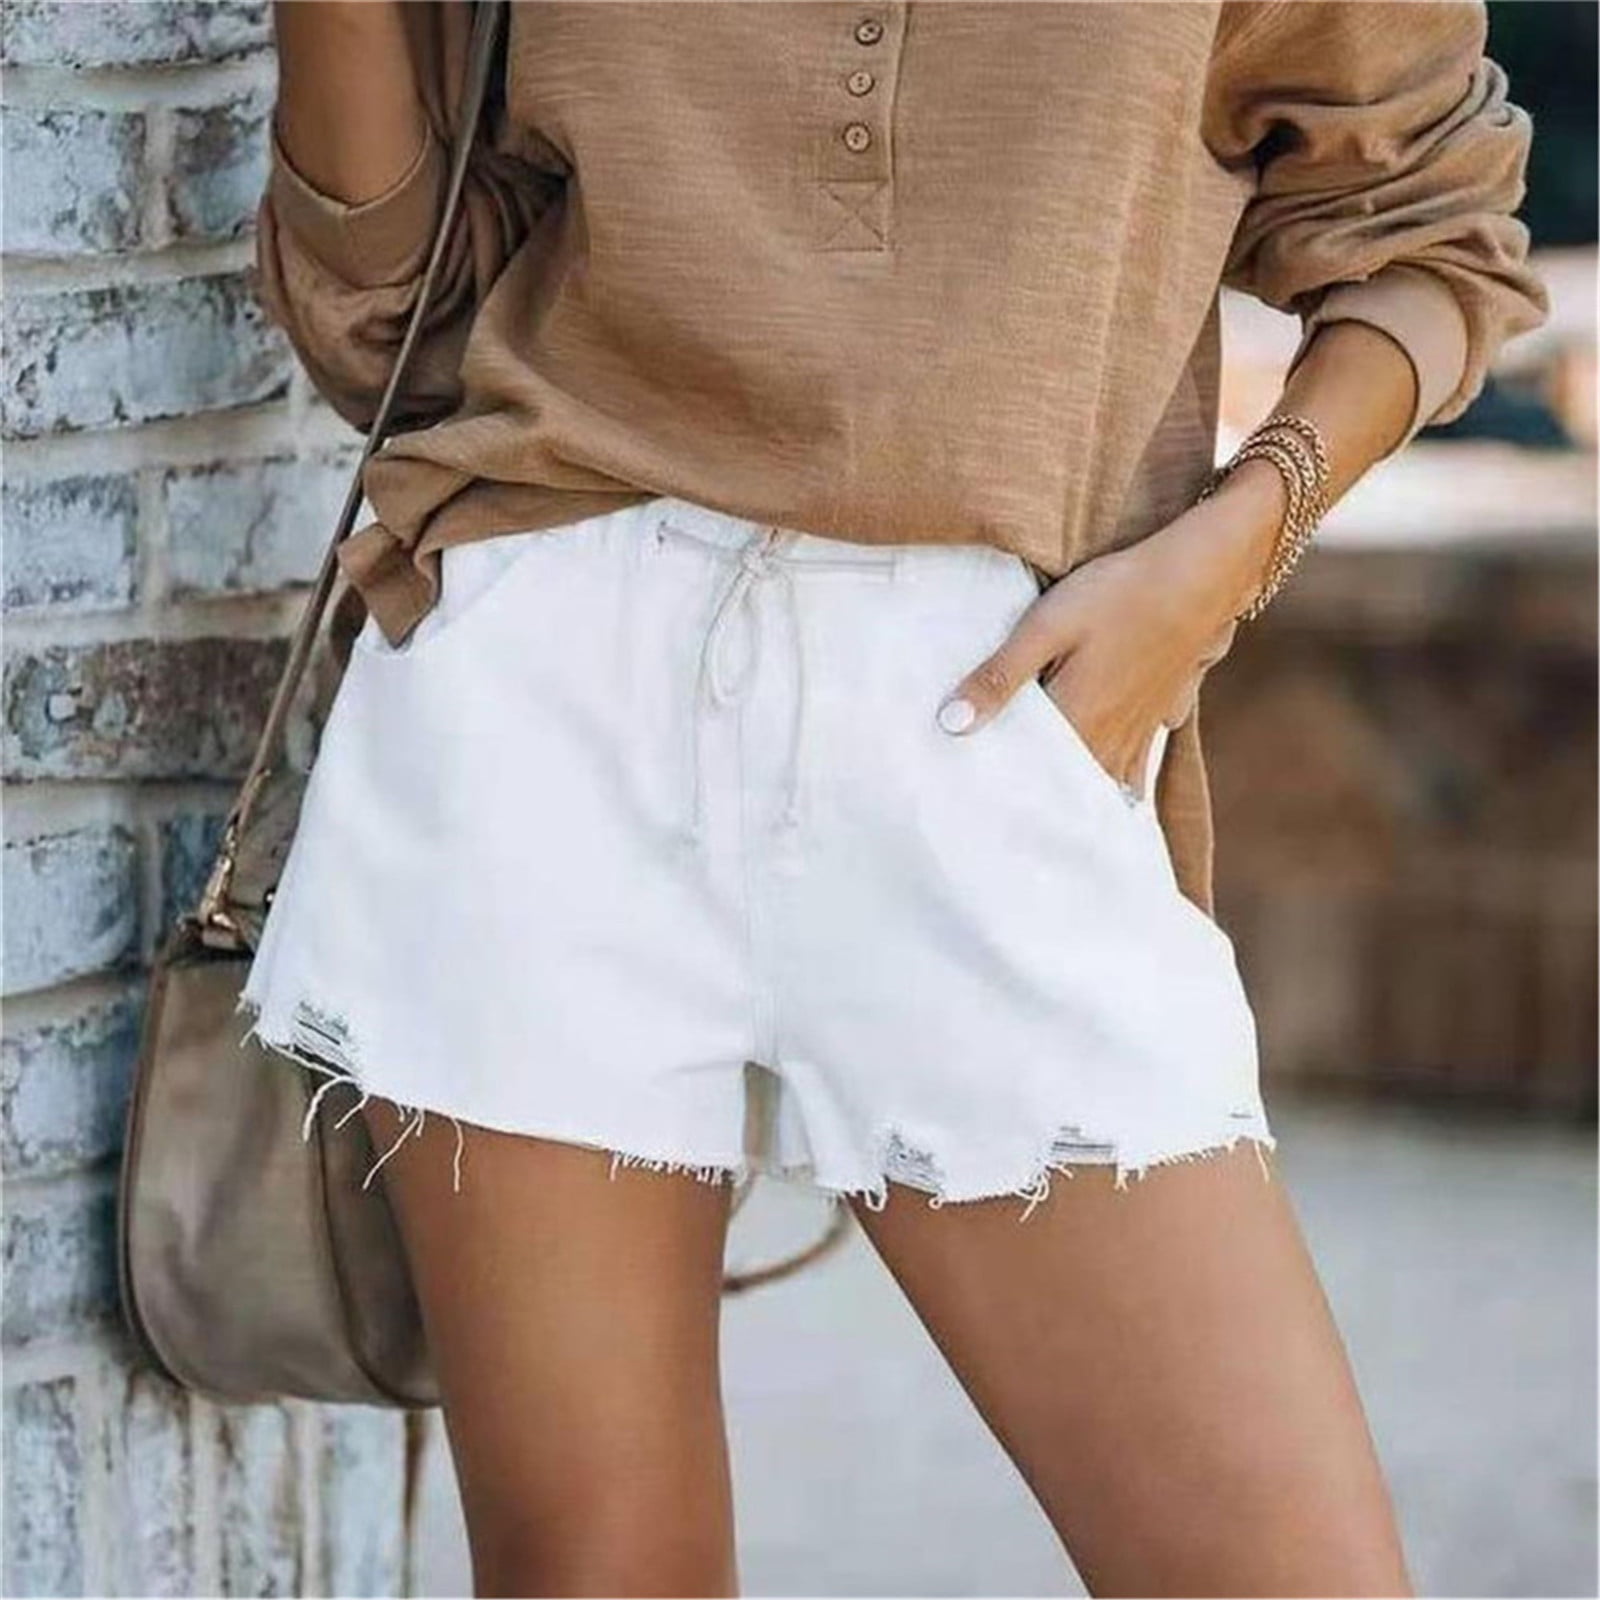 Denim shorts and white top casual spring outfit